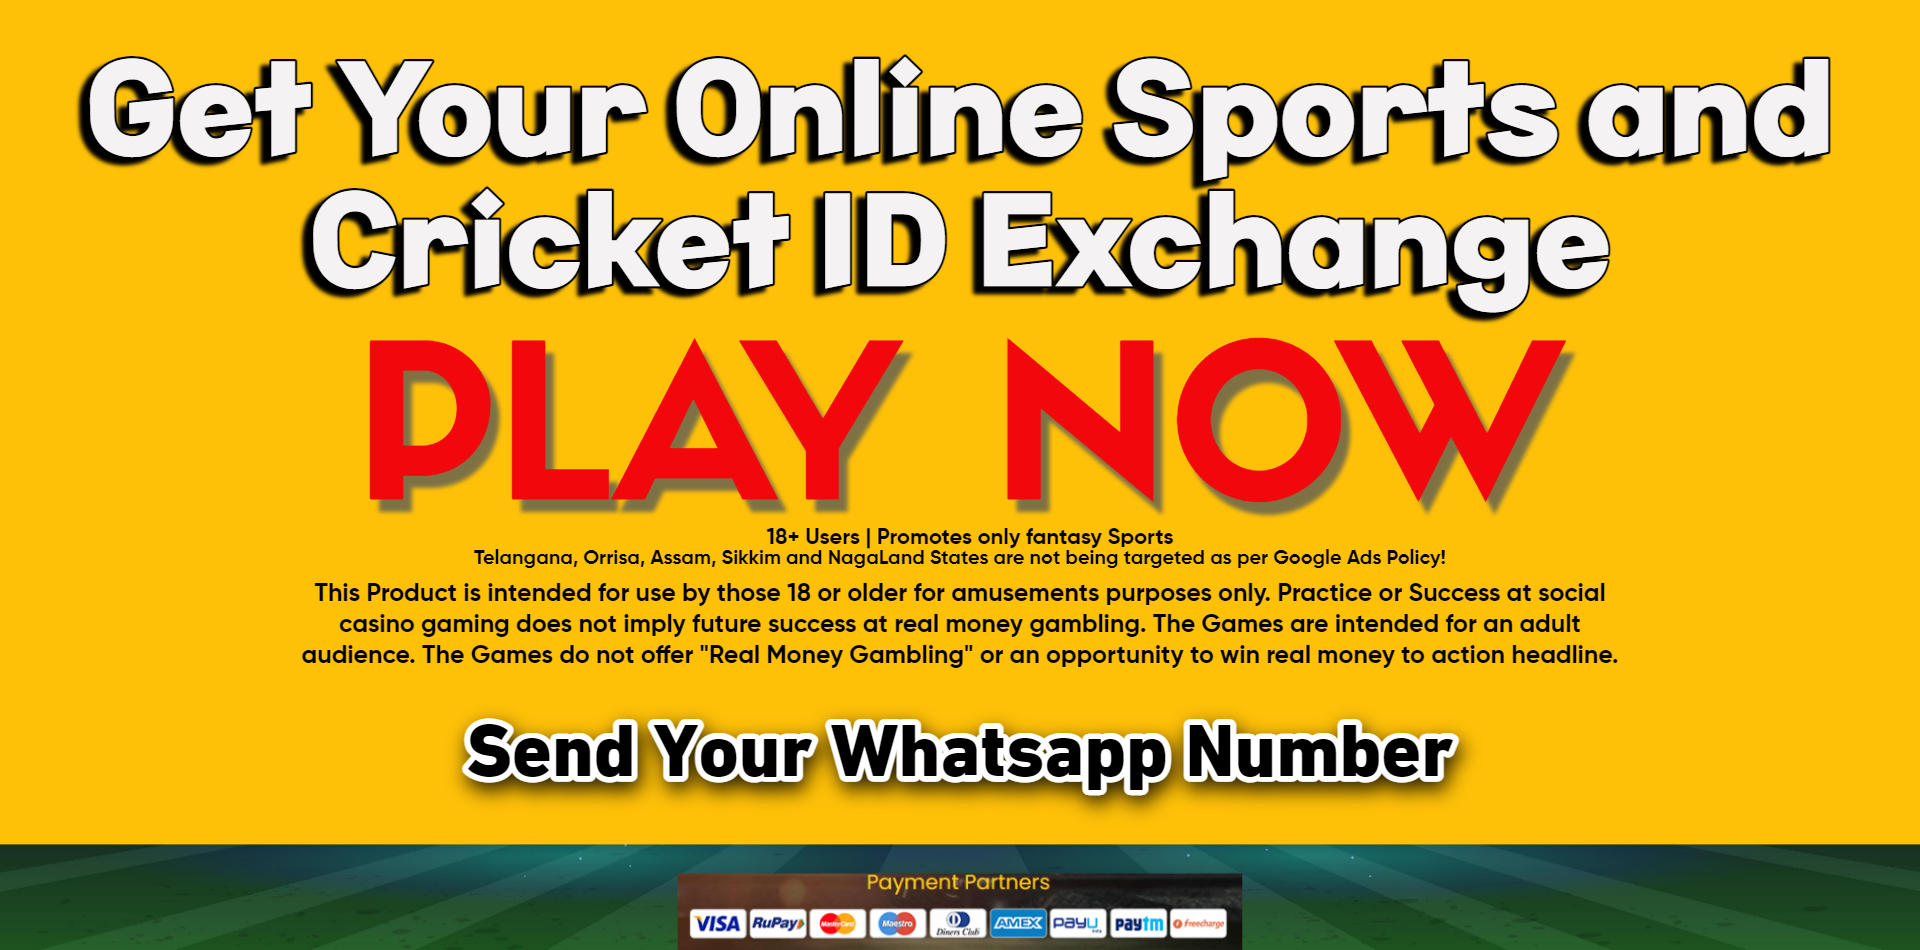 Get Your Fantasy Sports ID